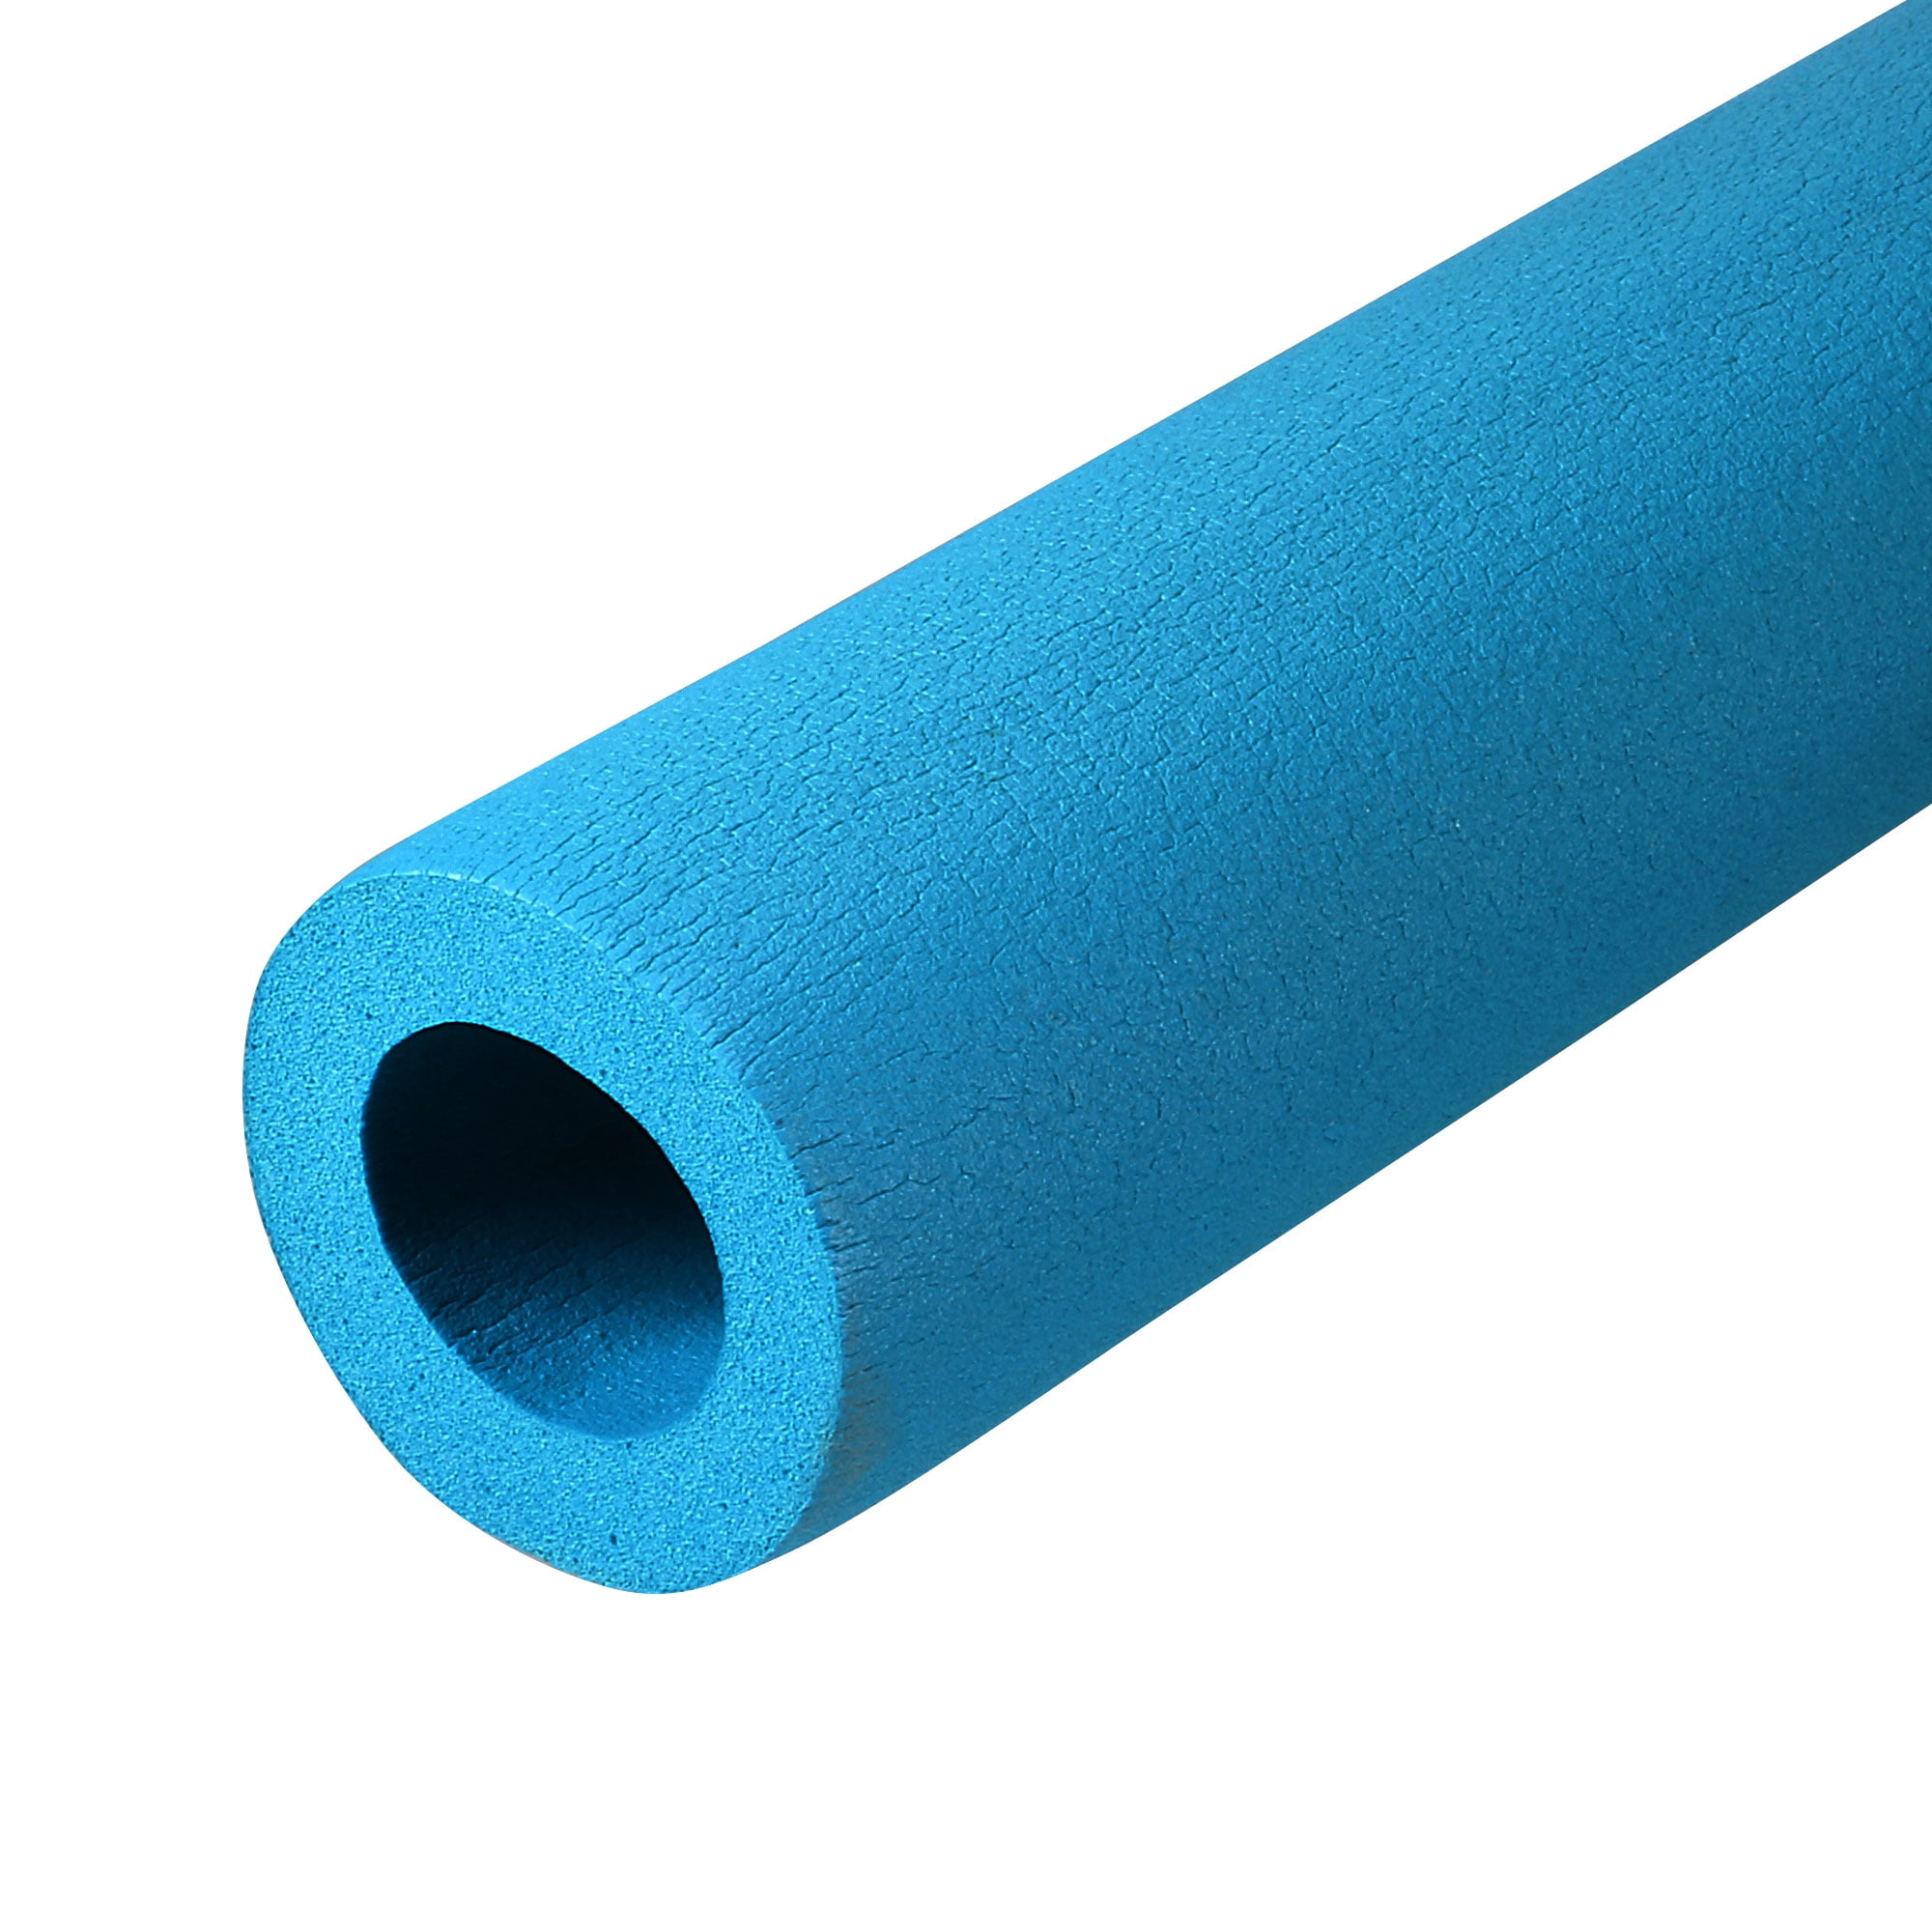 M-D 02394 Pipe Insulation Wrap, 30 ft L, 1/8 in Thick, PV